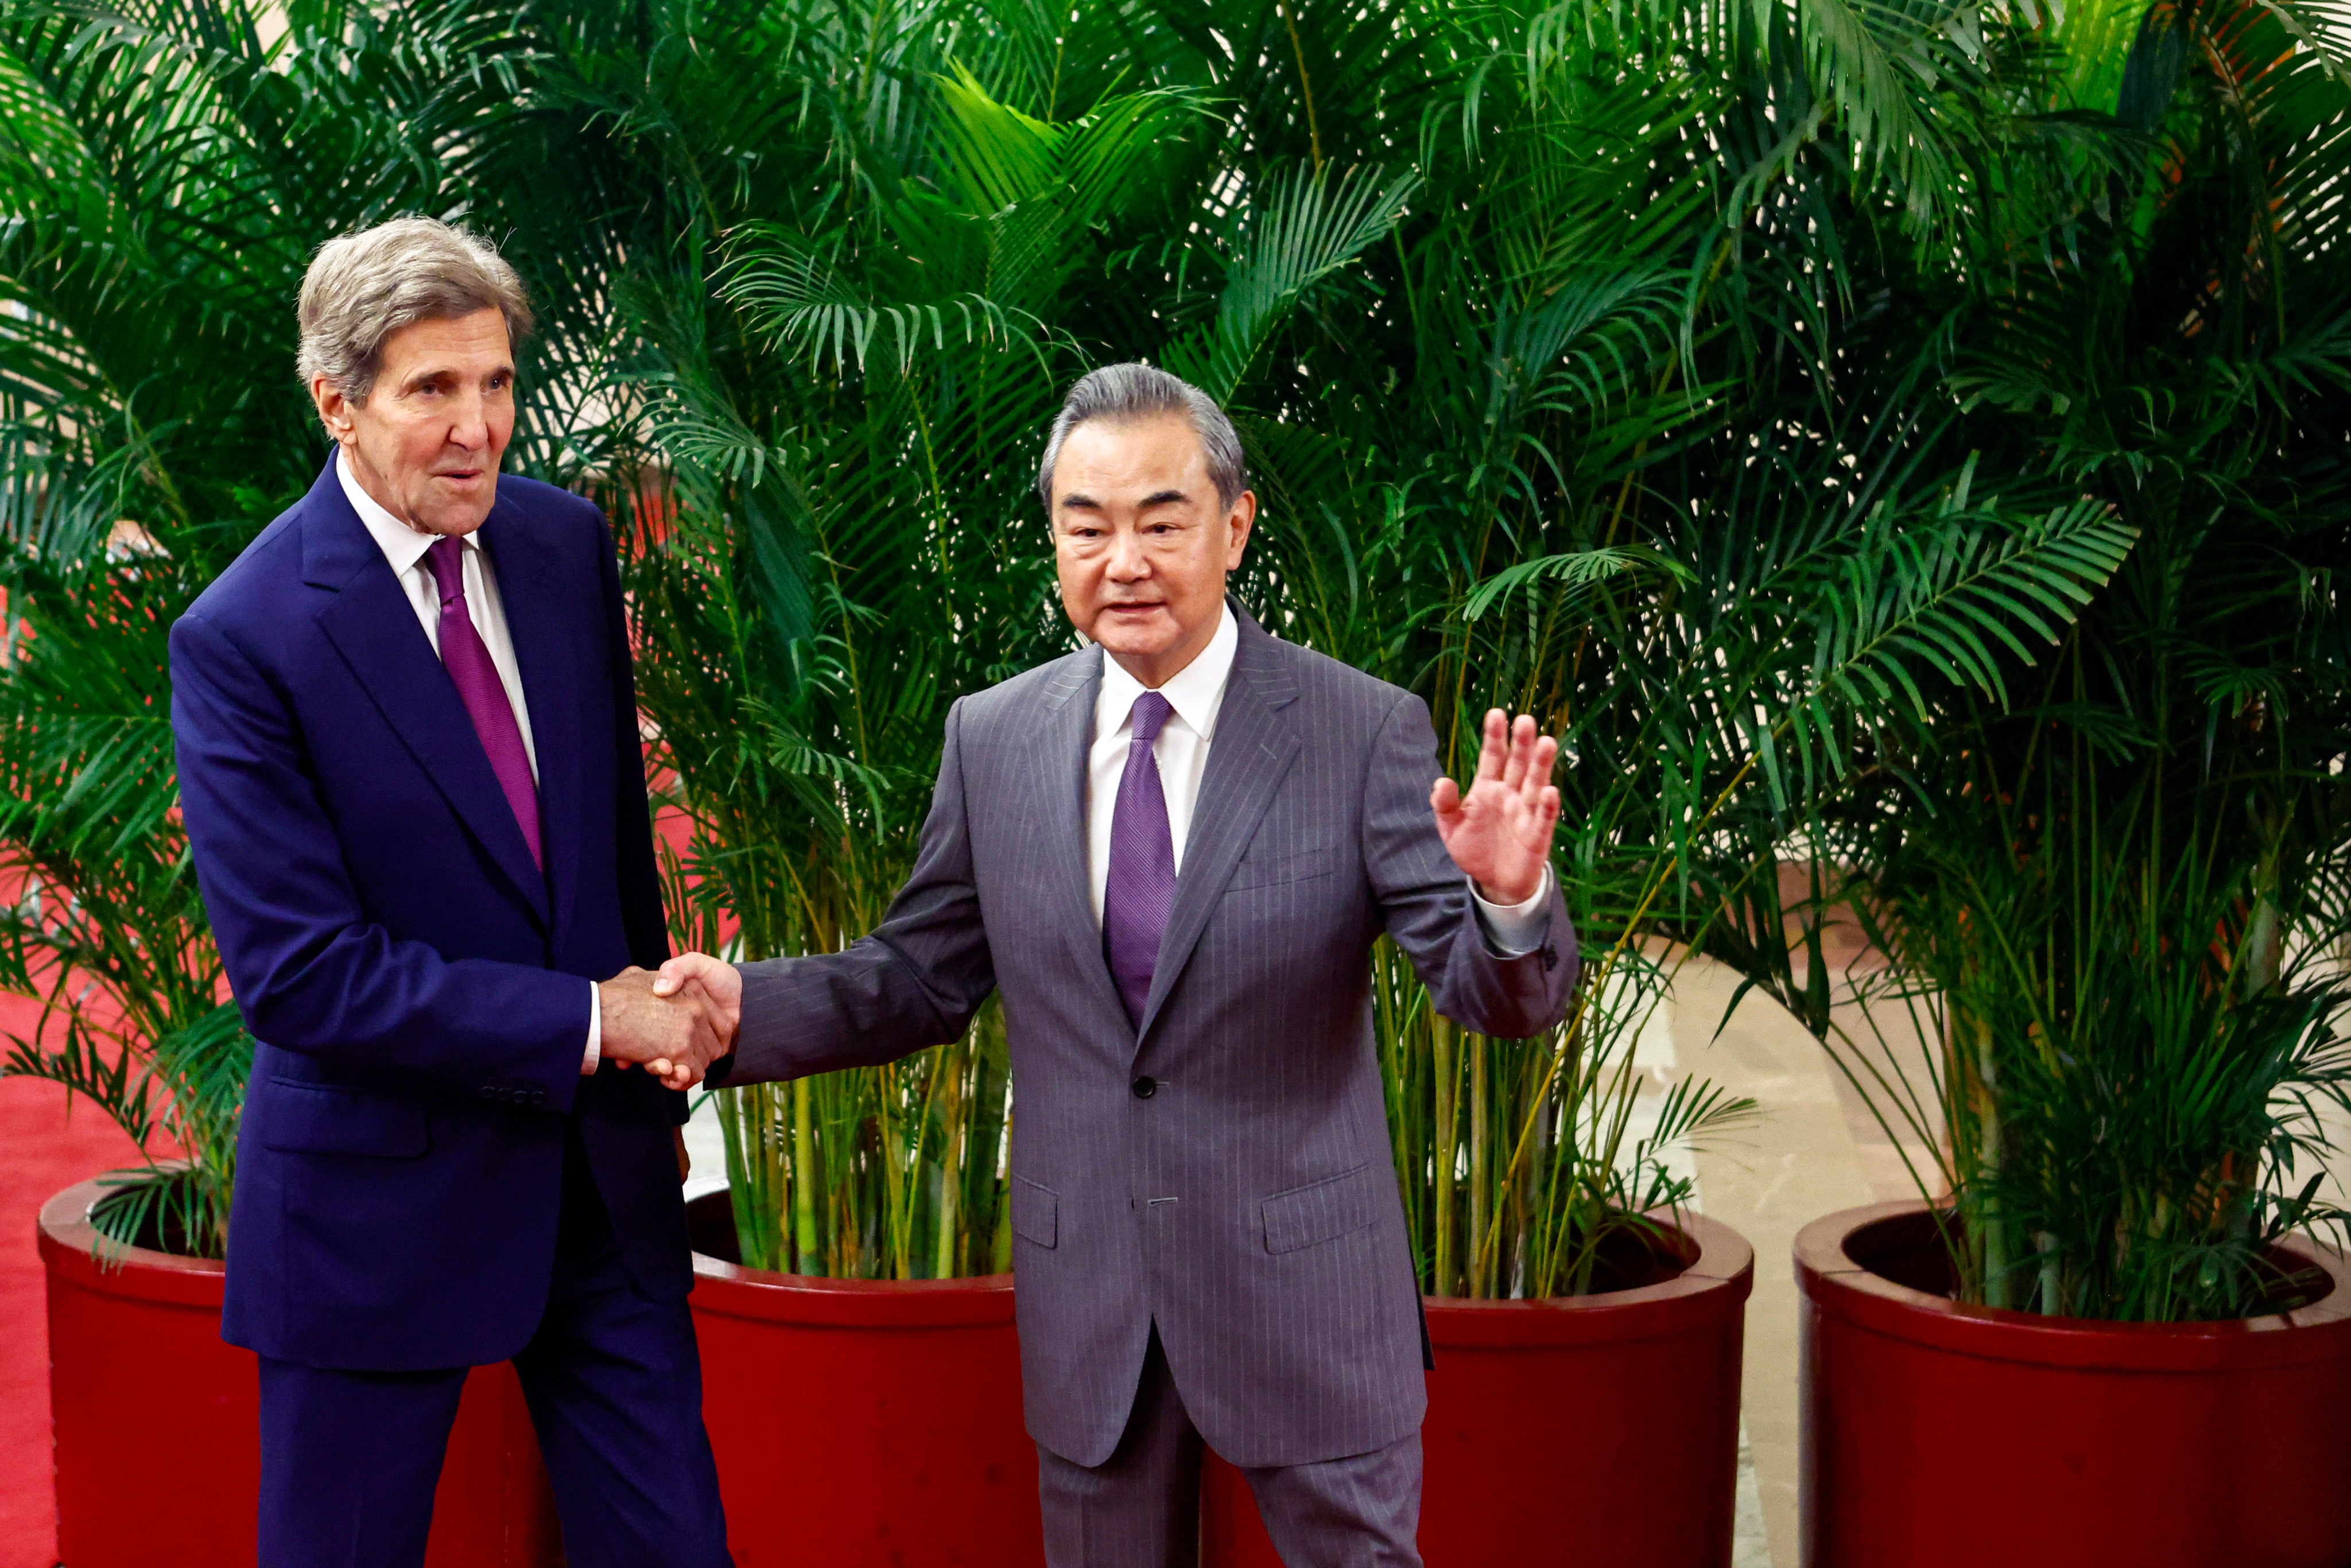 US climate envoy John Kerry and China’s foreign policy chief Wang Yi pictured ahead of their meeting in Beijing. Photo: AP